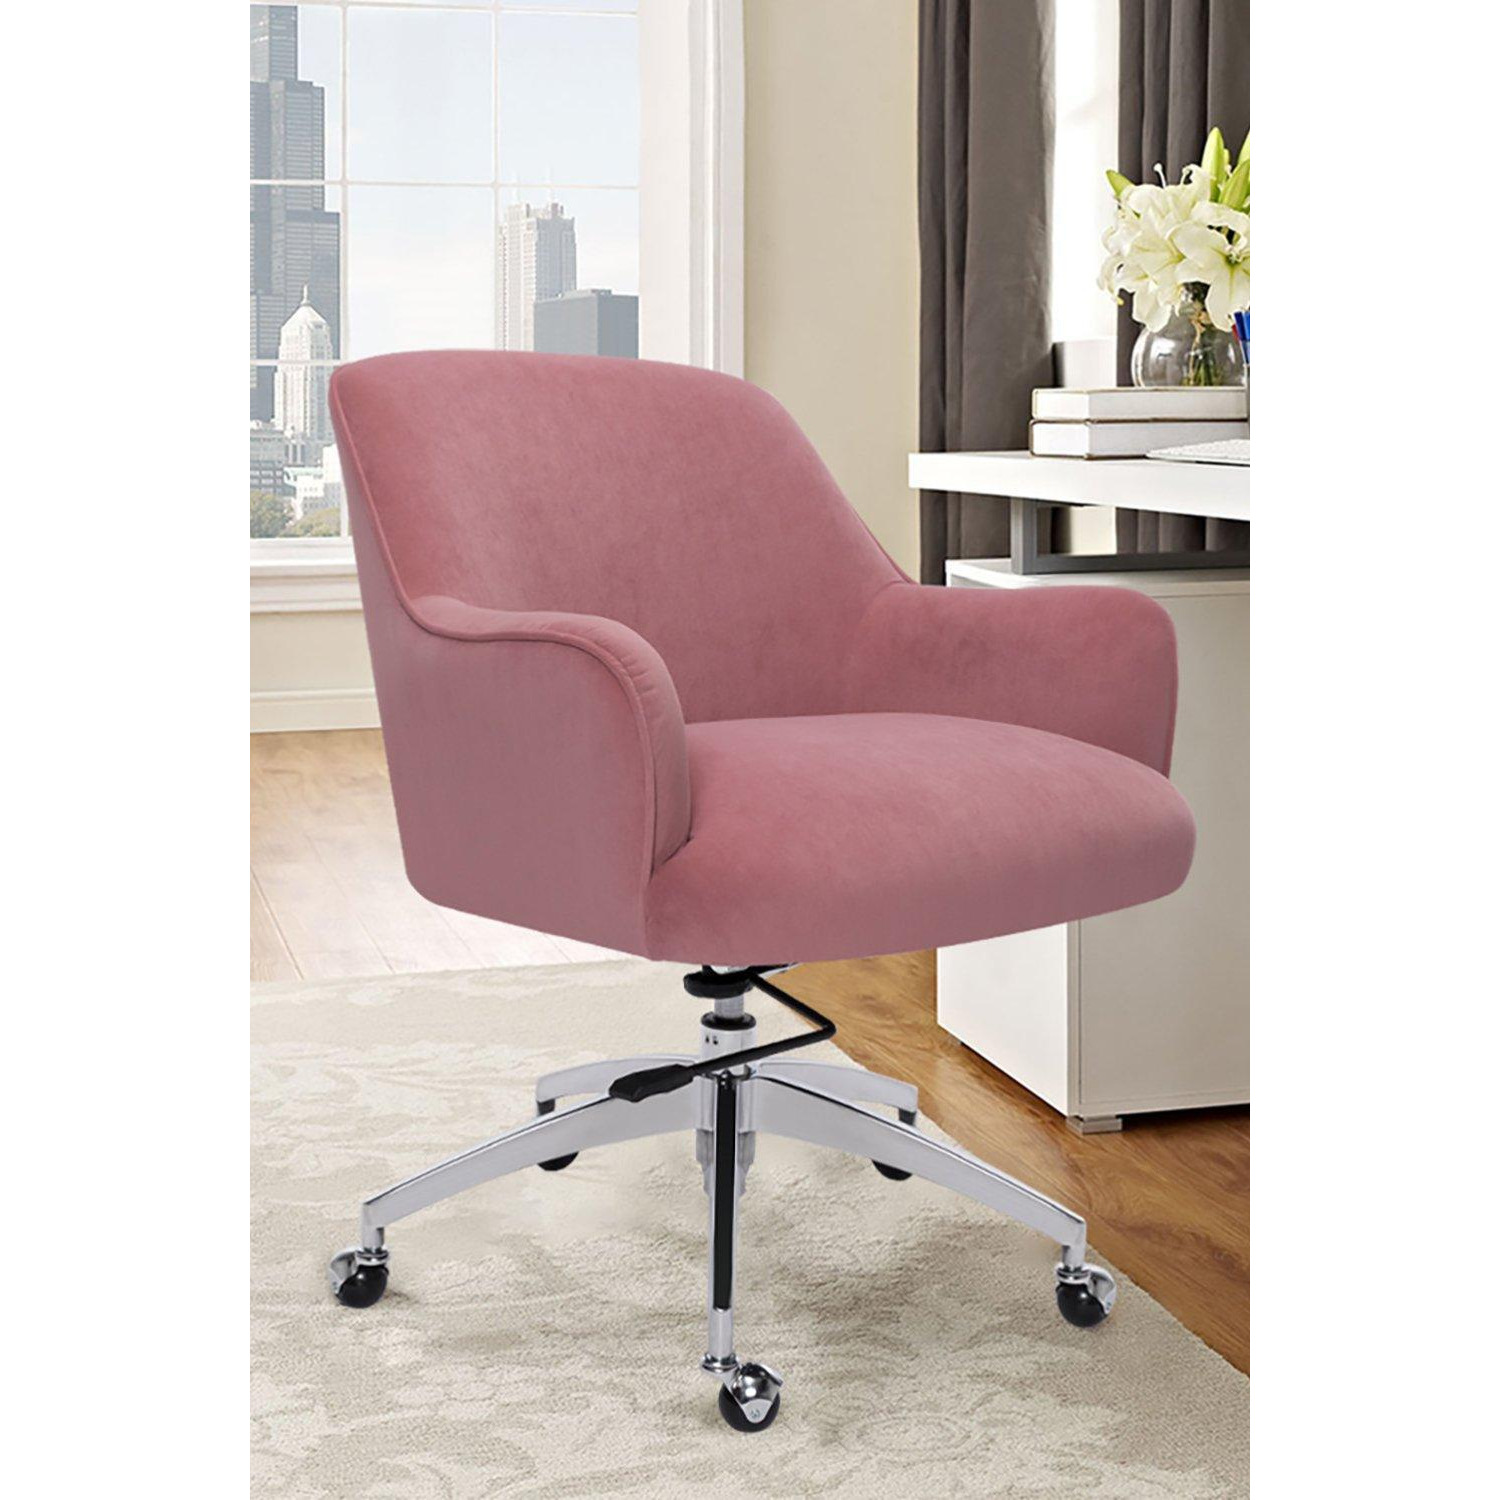 Office Home Chair Computer Desk Chair Swivel Adjustable Lift, Pink - image 1